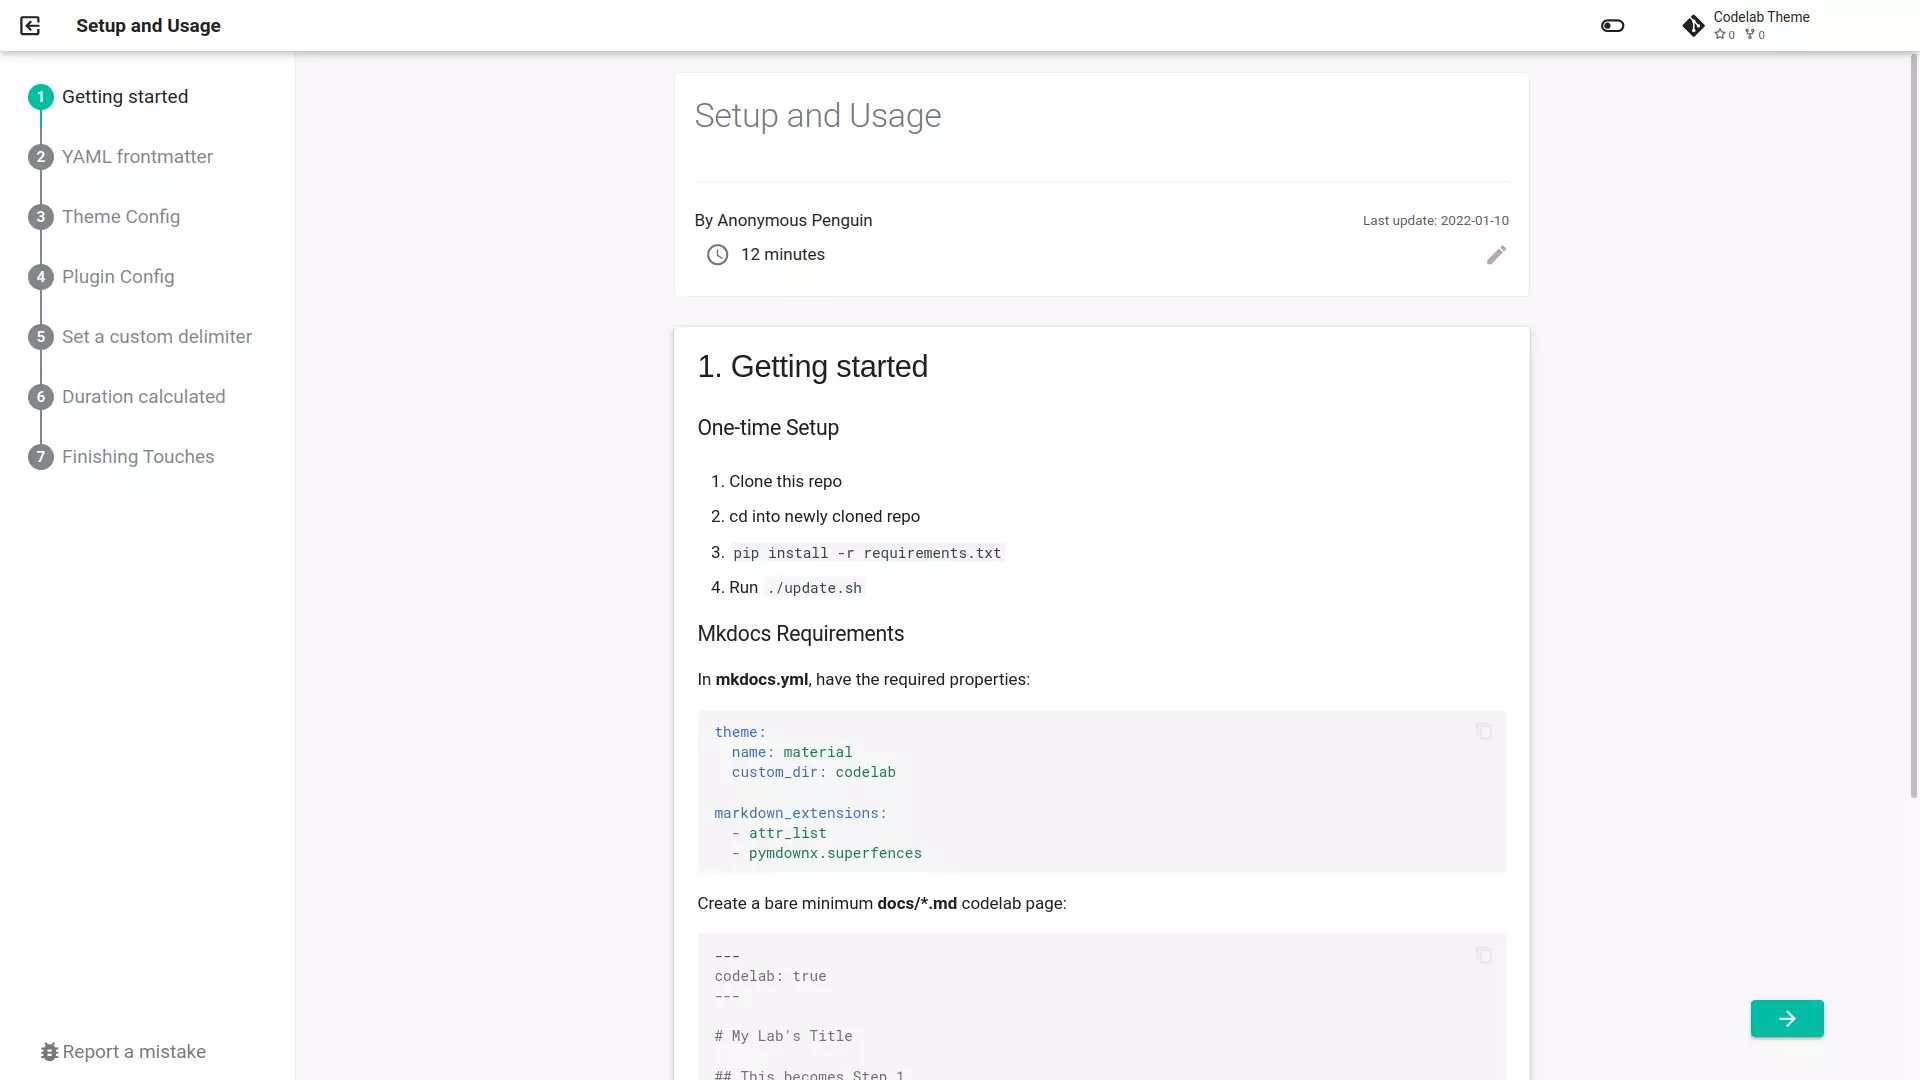 Mkdocs codelab page showing step 1 of the theme.